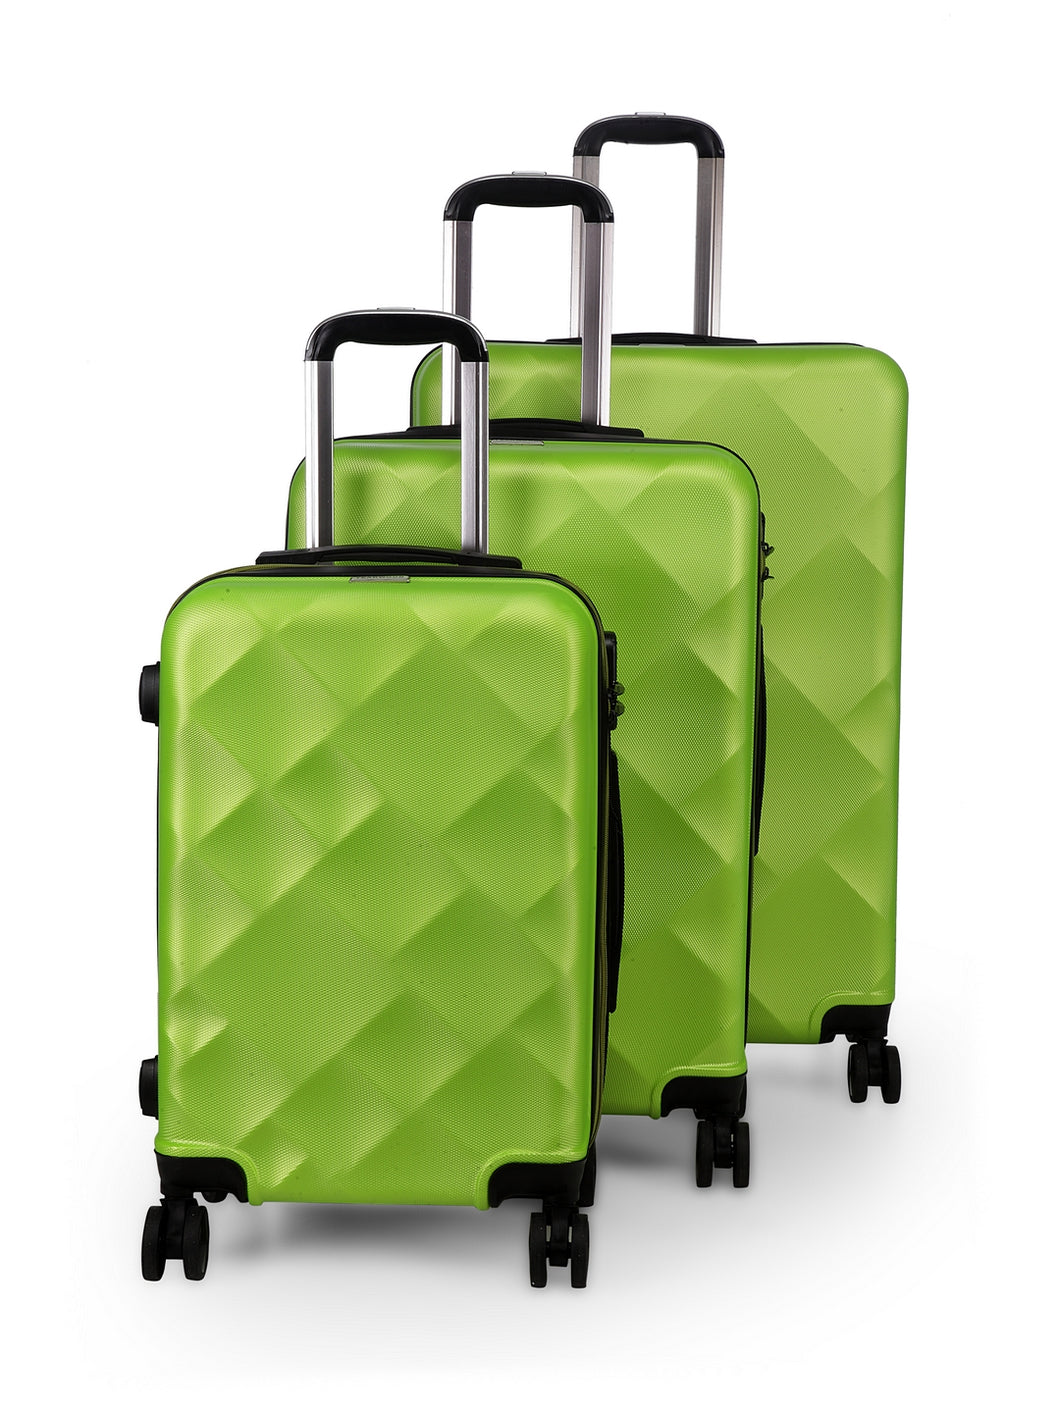 Unisex Set of 3 Green Textured Hard-Sided Trolley Suitcases